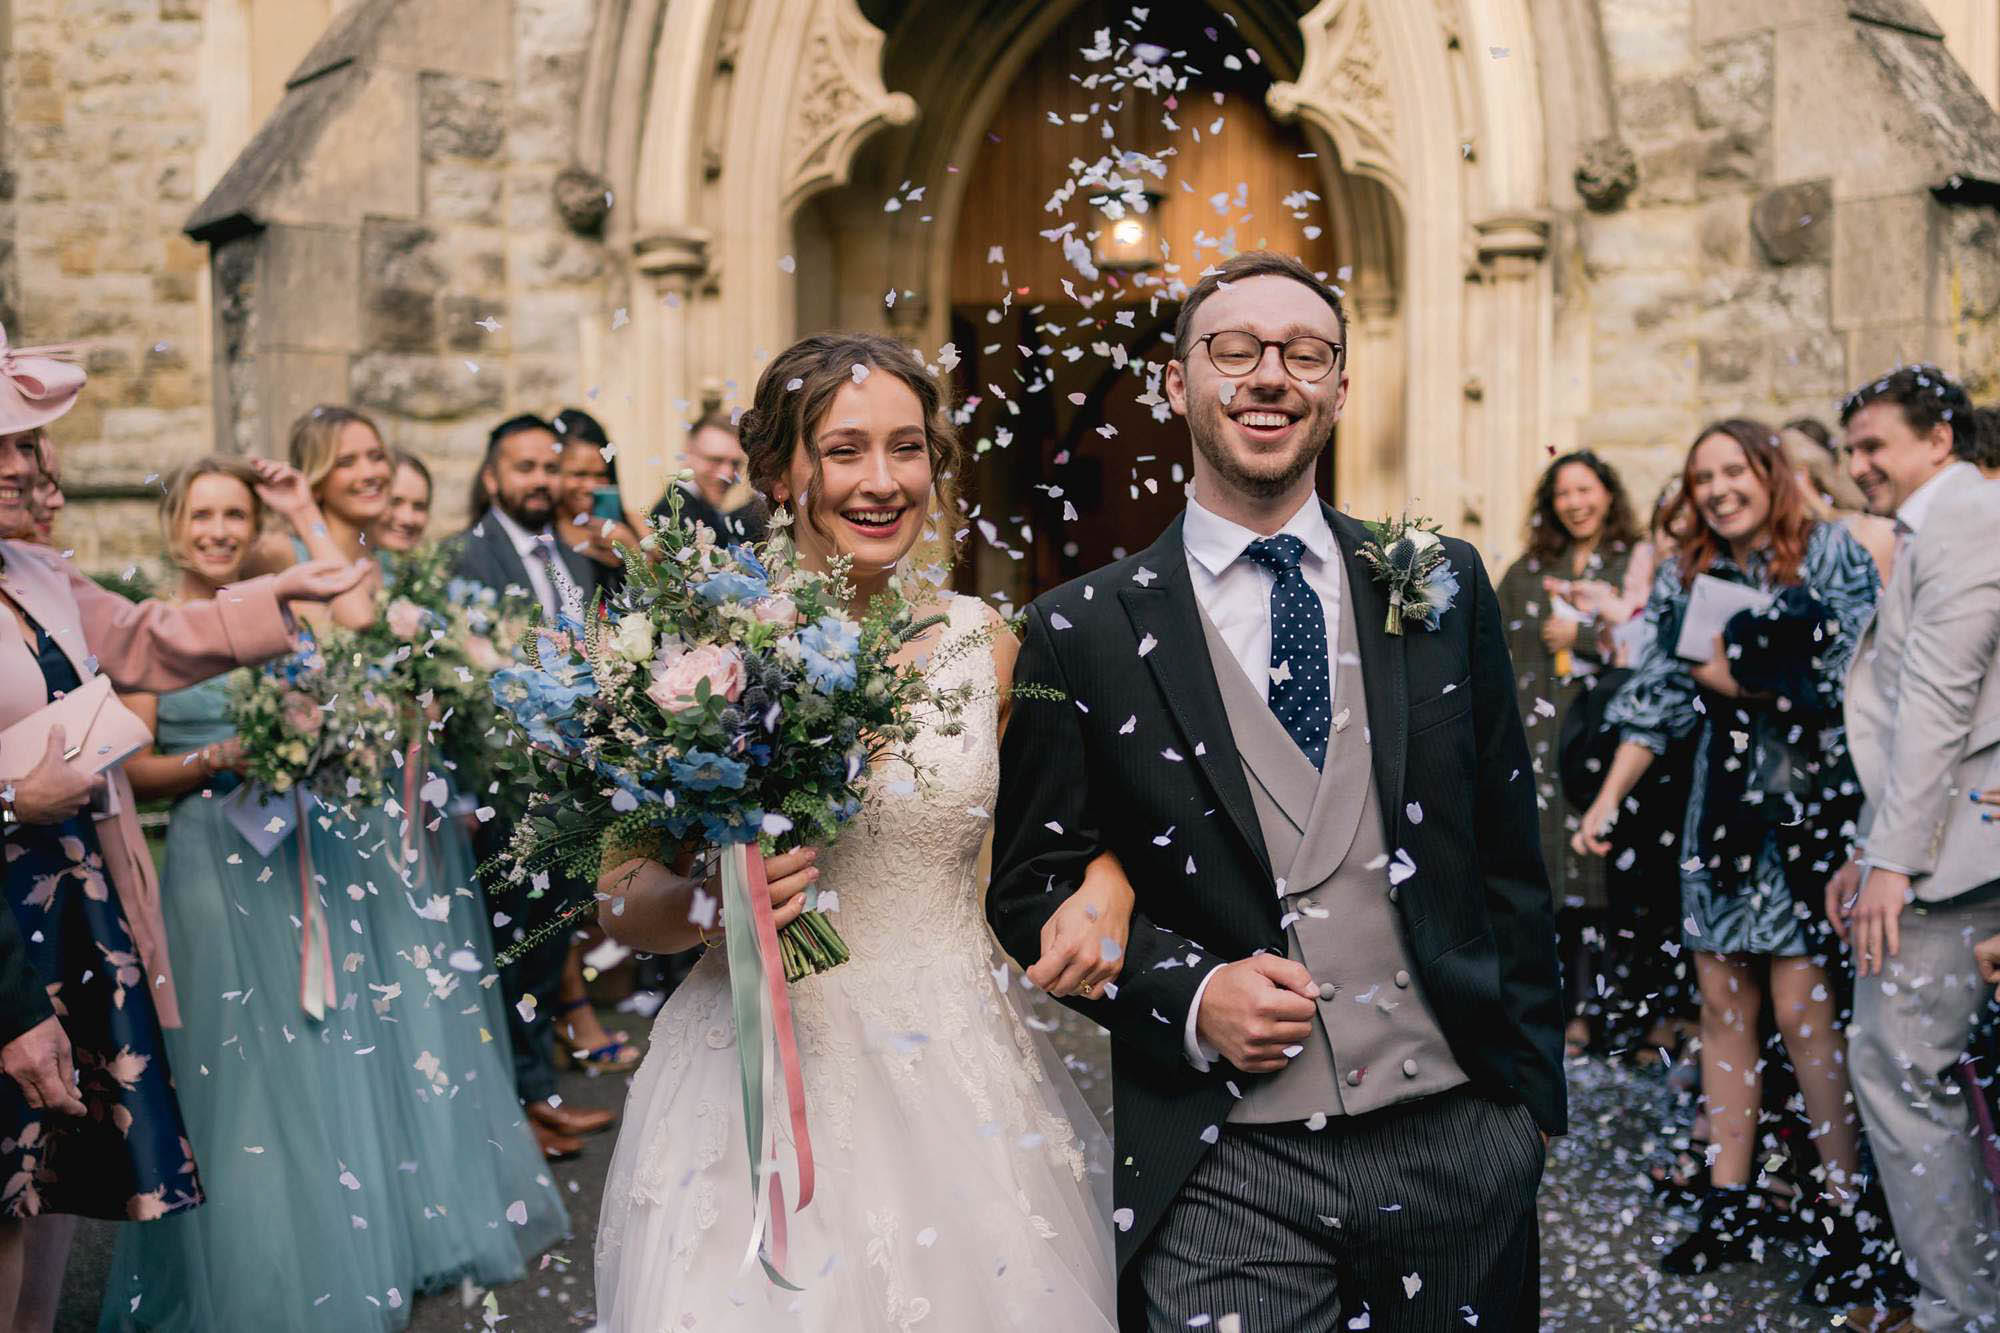 Wedding guests throw confetti at the bride and groom on their wedding day at Salomons Estate in Tunbridge Wells.